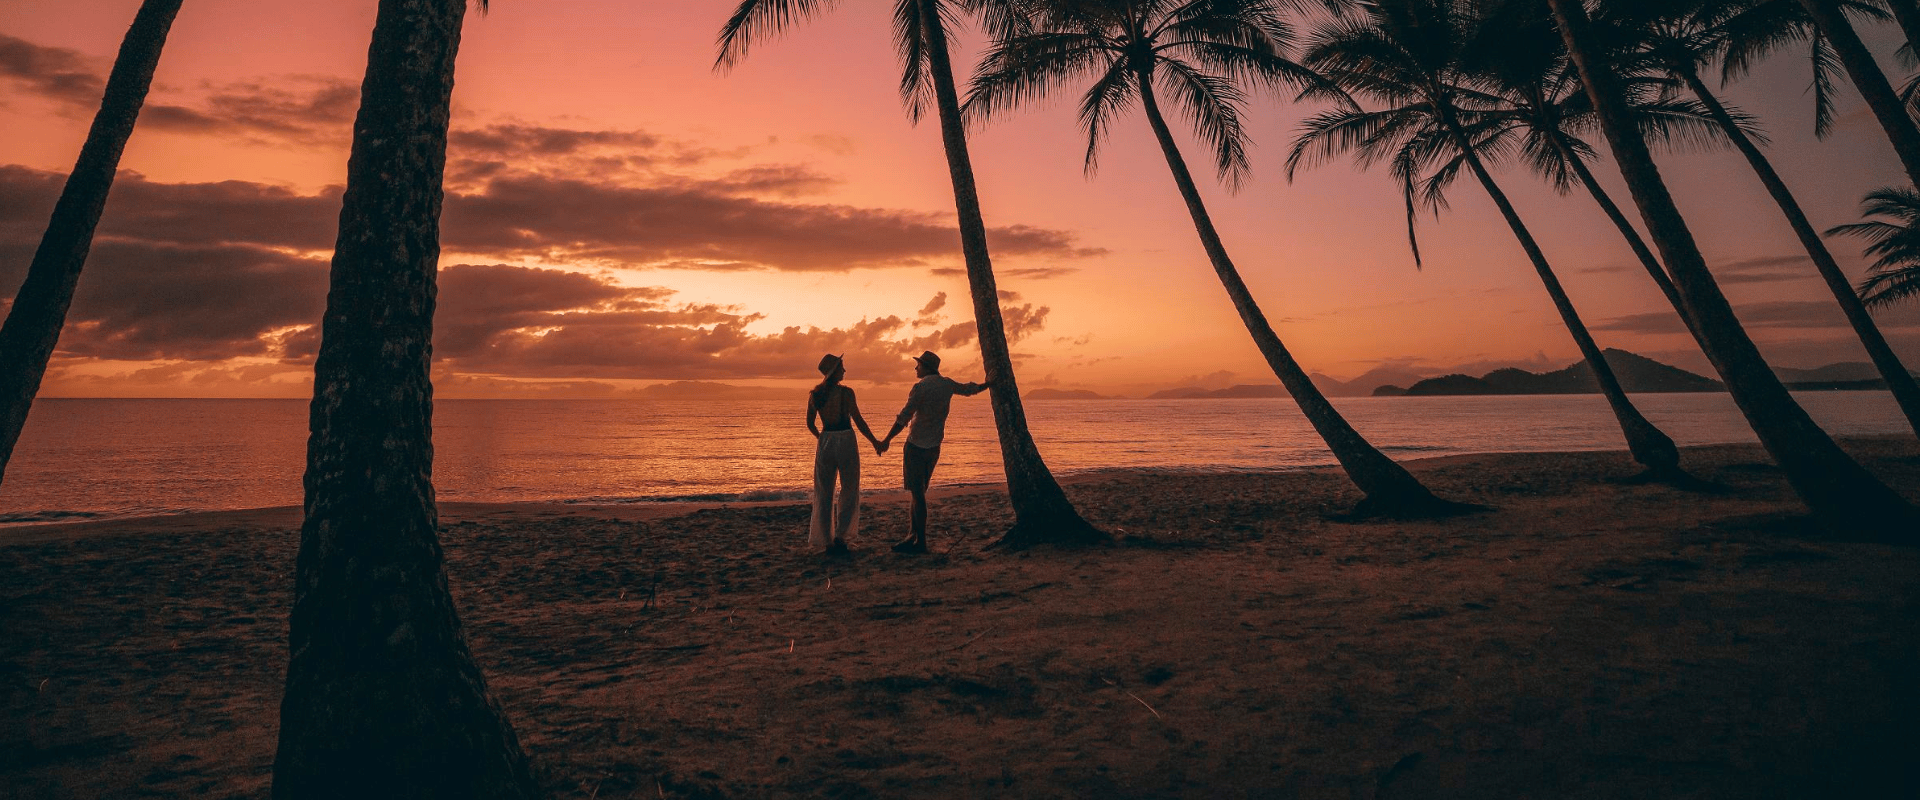 Couple Standing Amongst Palm Trees On Beach During Sunset